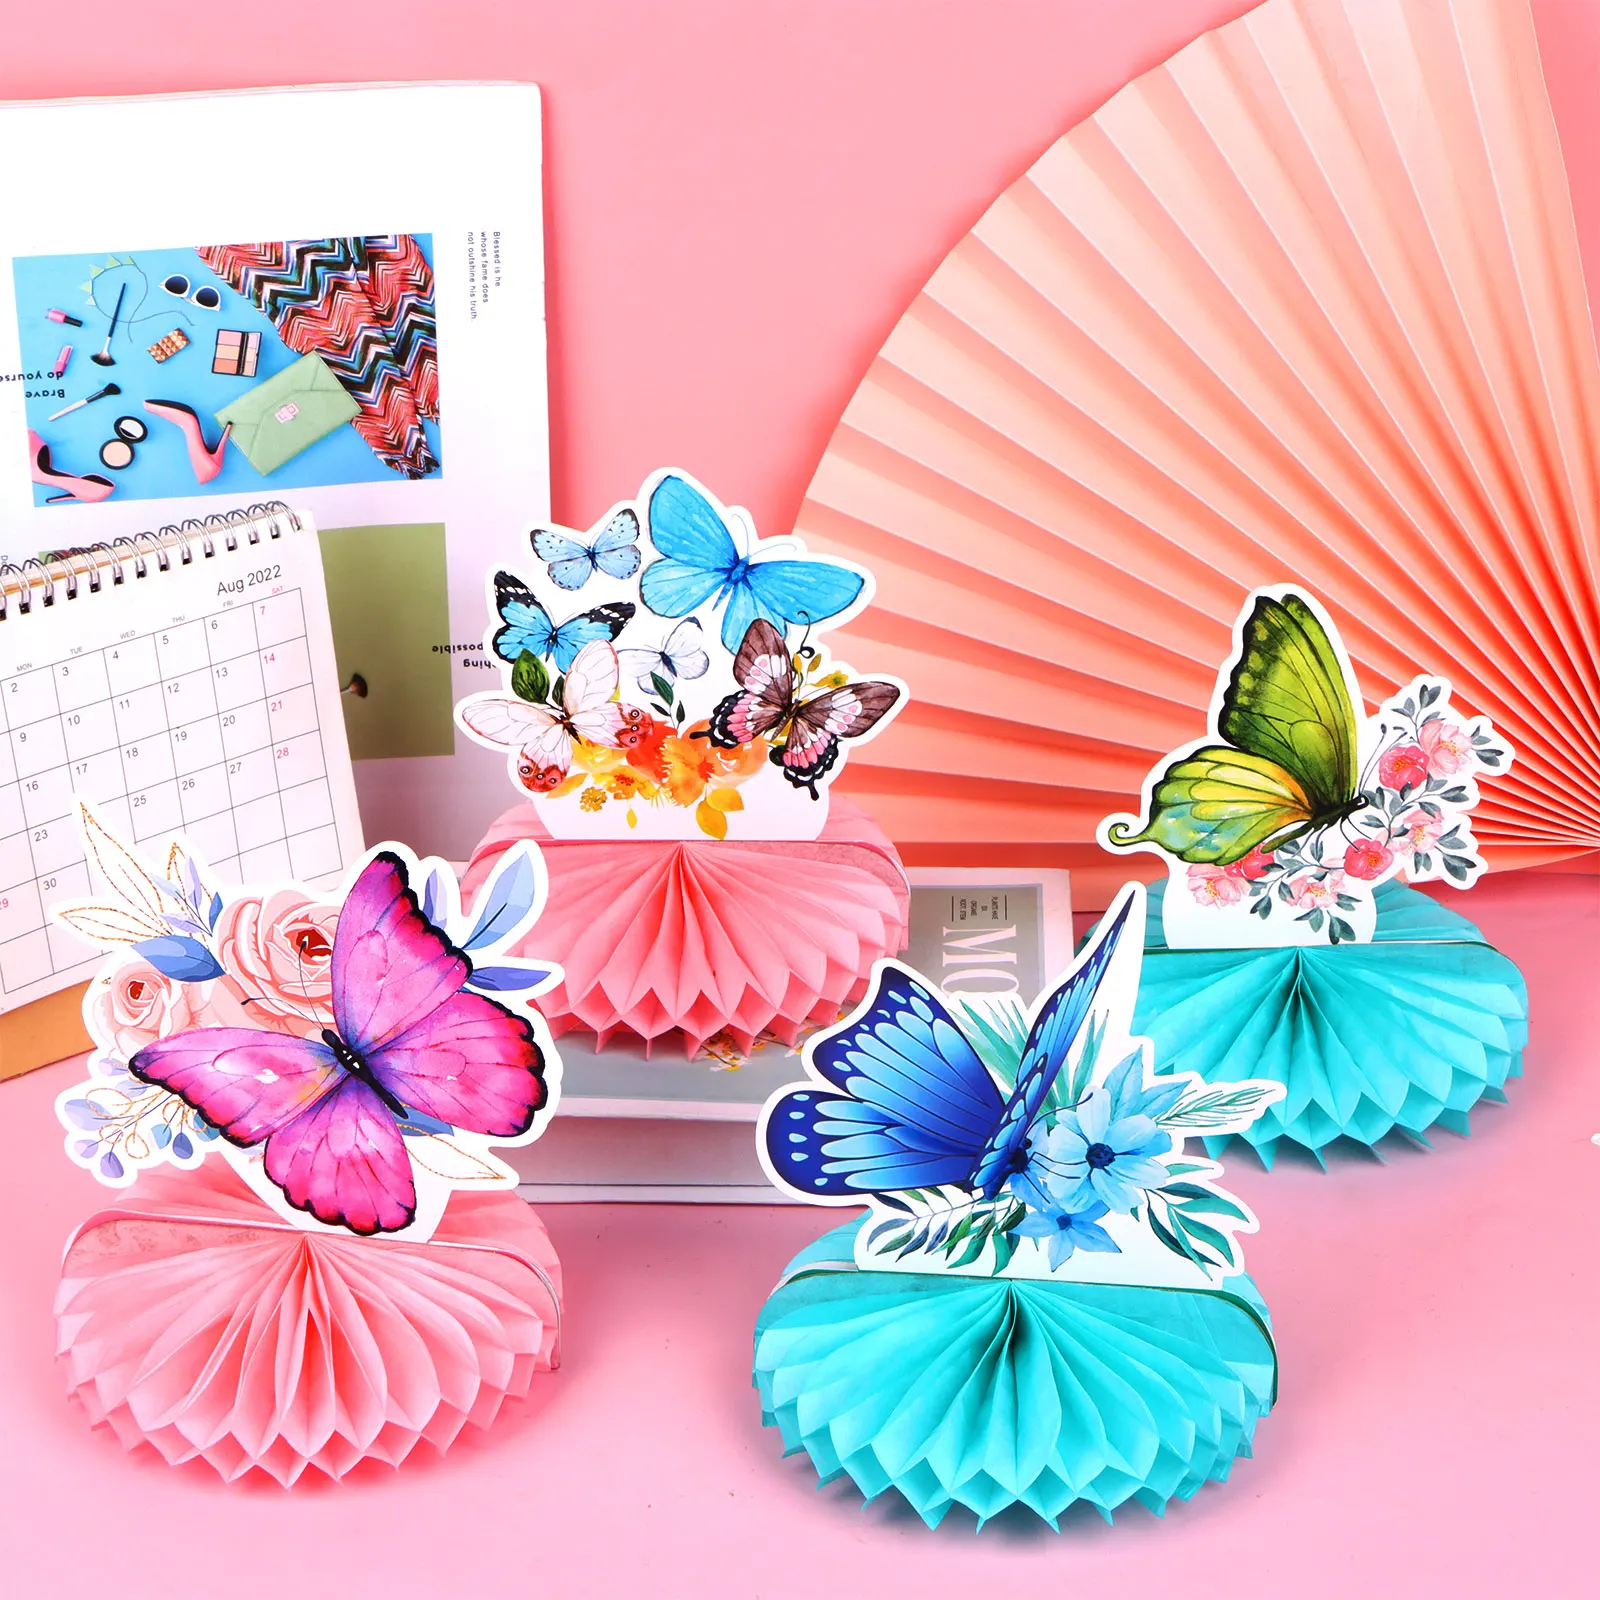 

9 Pieces Butterfly Honeycomb Table Centerpiece Butterfly Wedding For Children's Birthday Party Gfit Favors Home Decorations